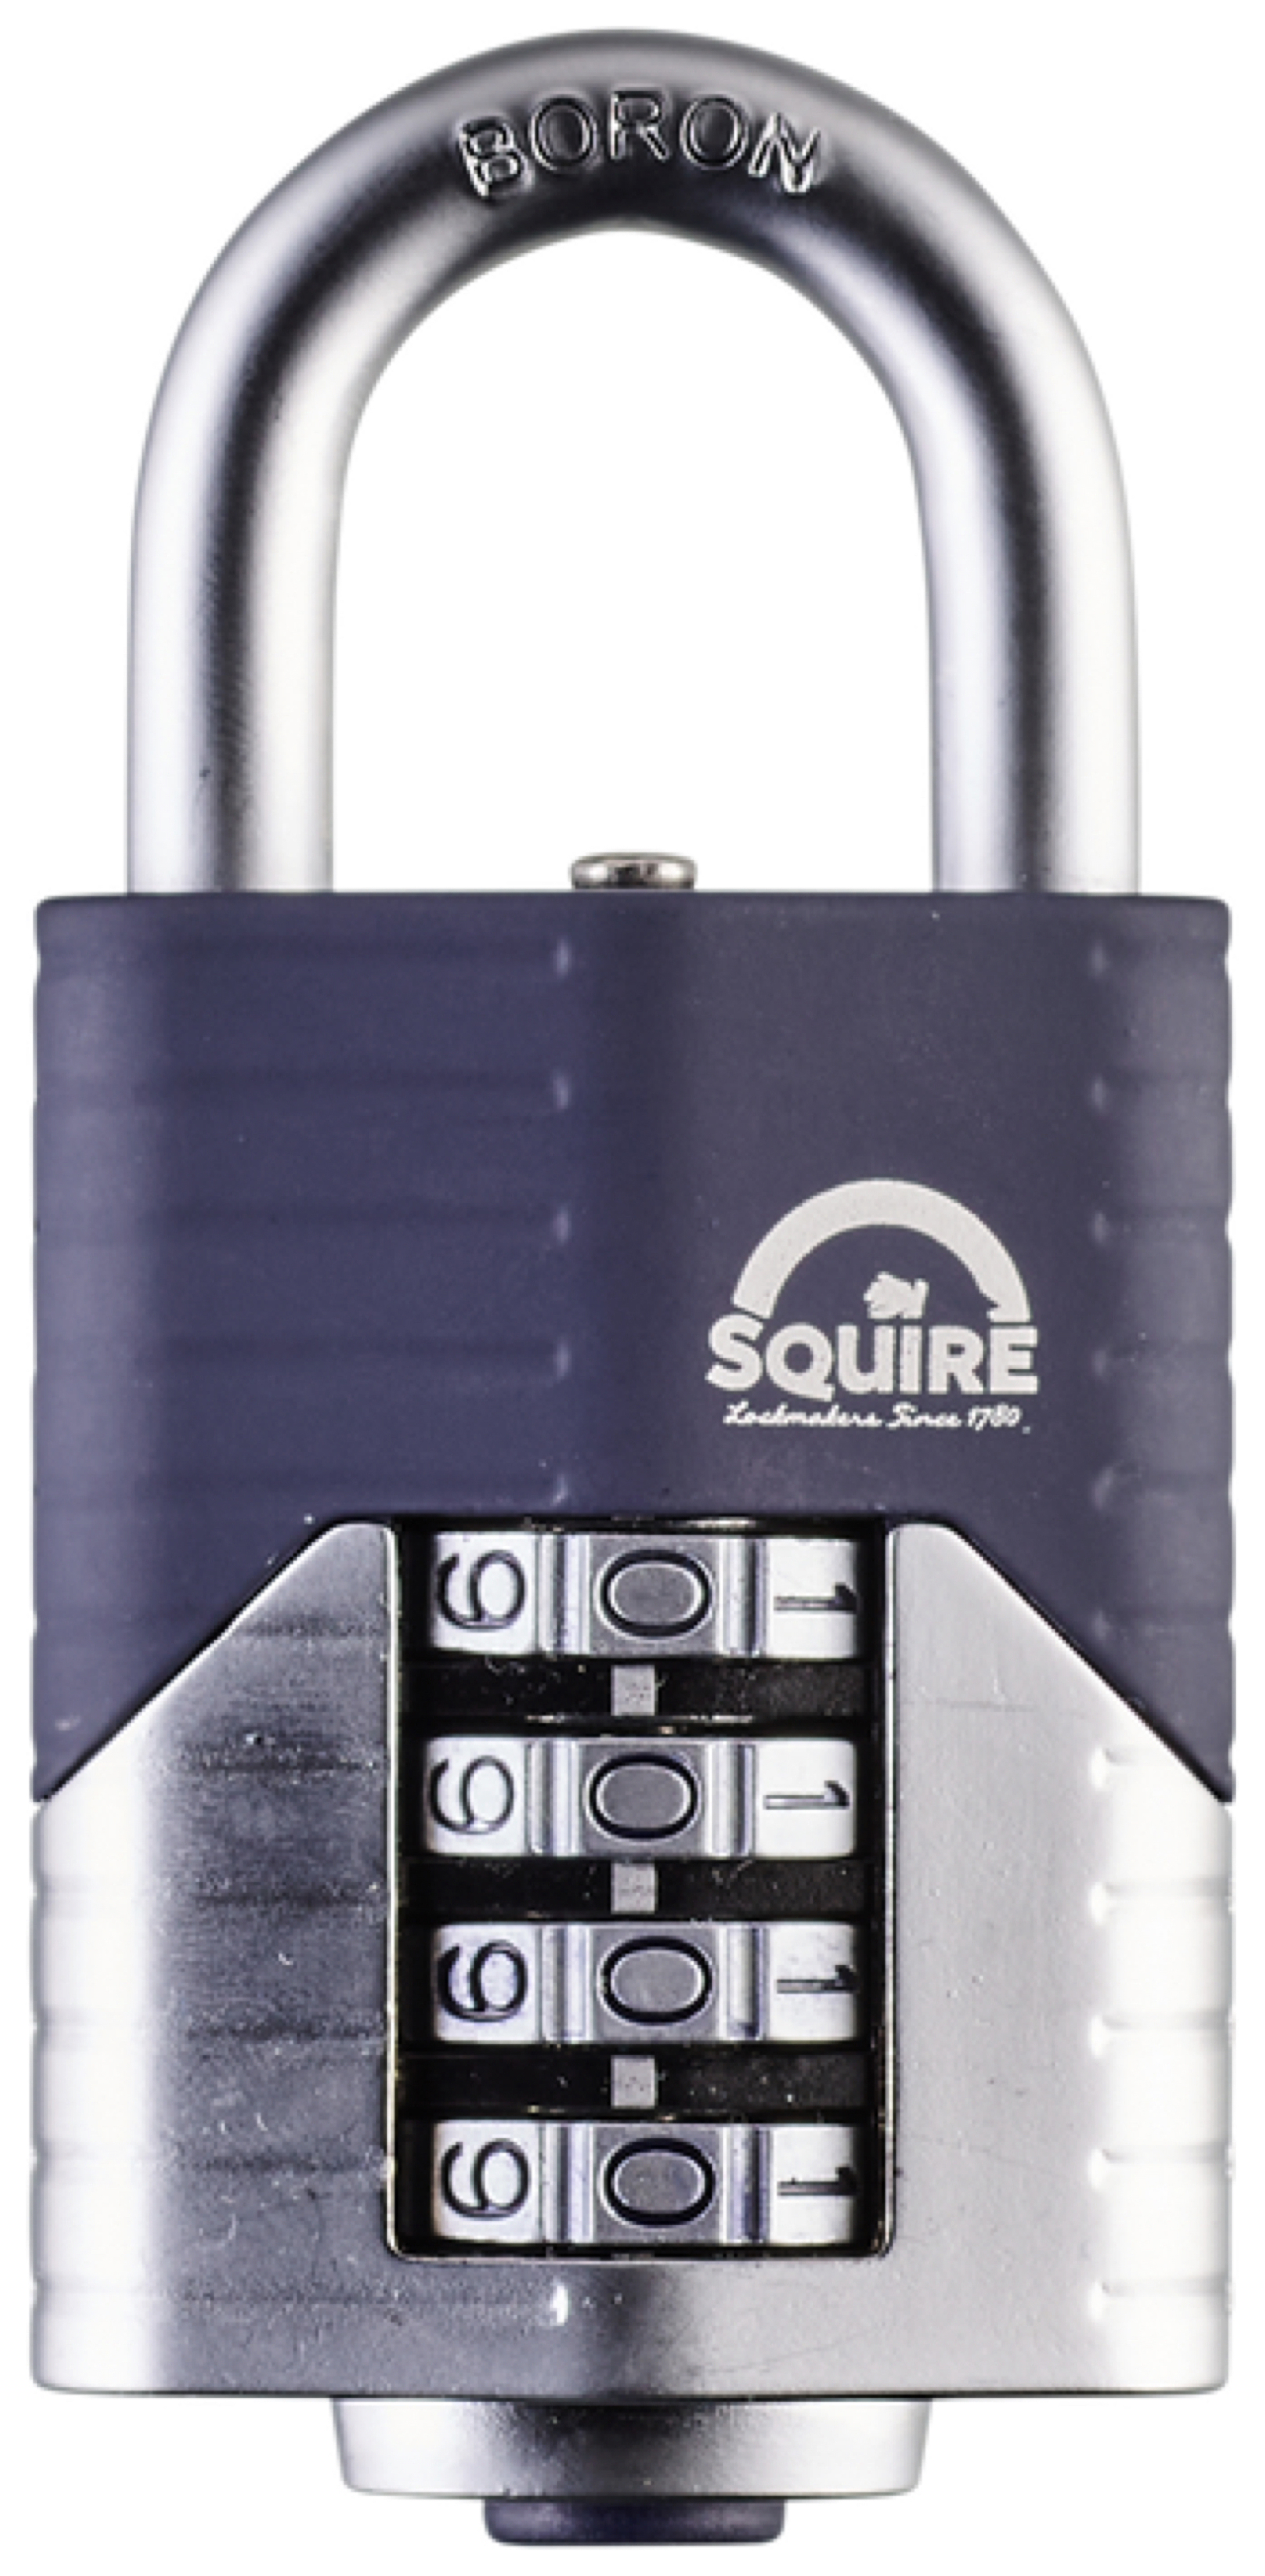 Image of Squire Combination Padlock with Boron Shackle - 50mm